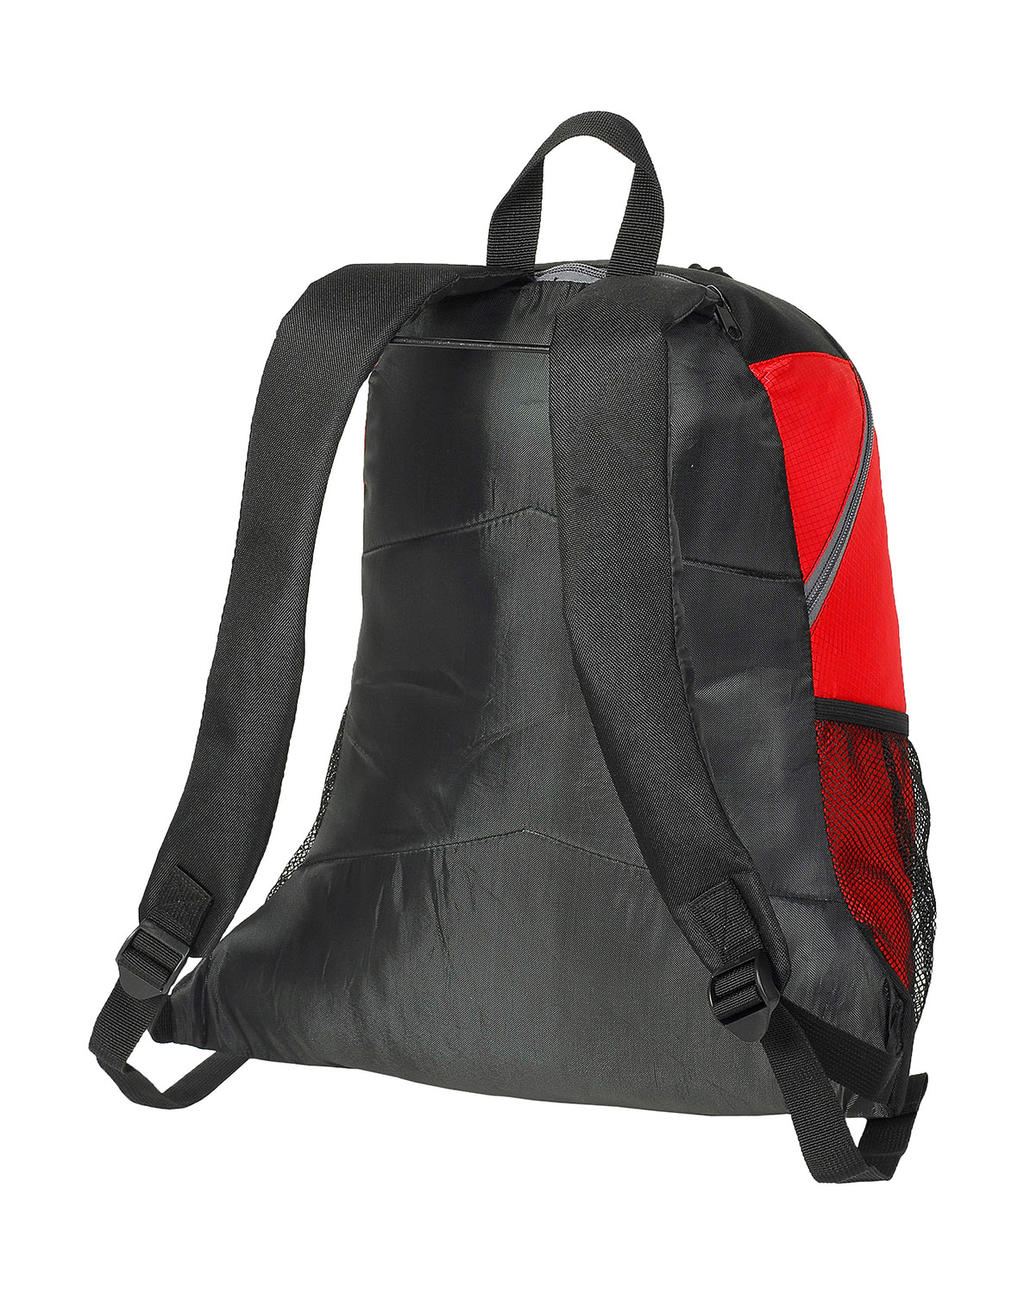  Chester Backpack in Farbe Black/Red